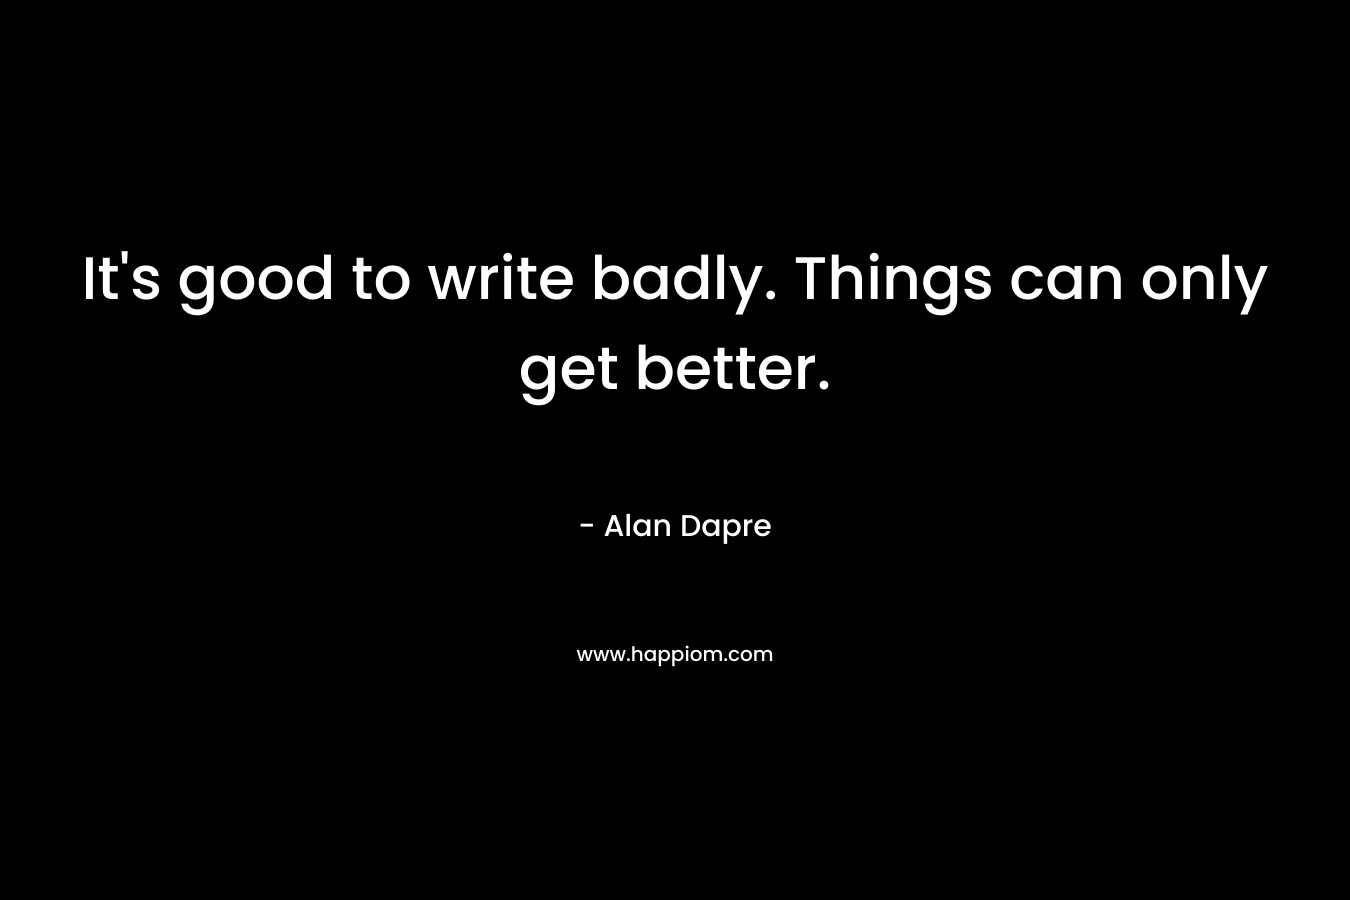 It's good to write badly. Things can only get better.